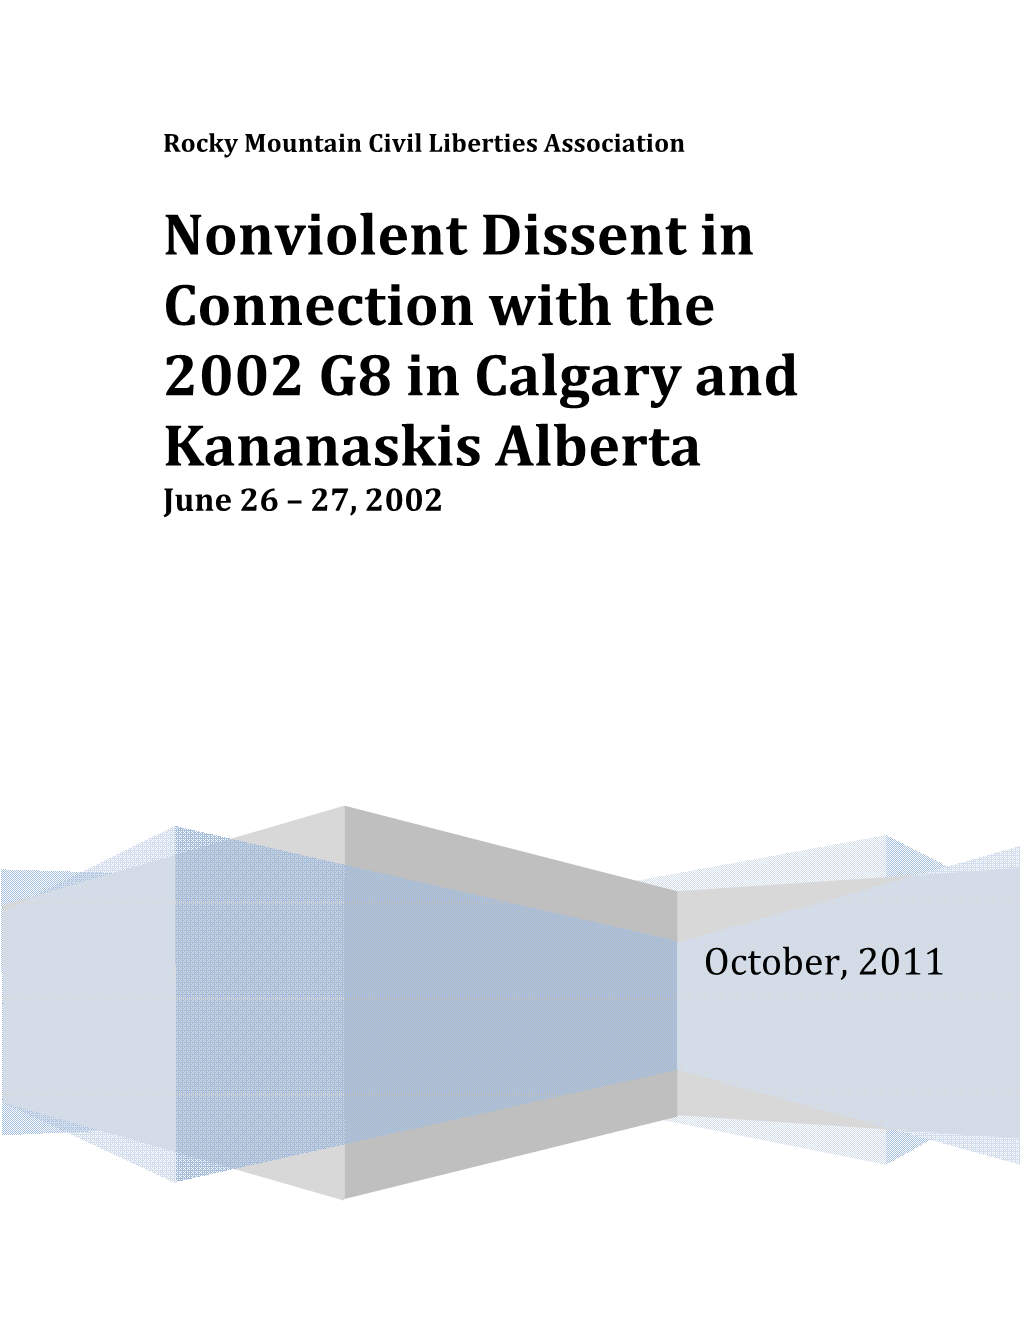 Nonviolent Dissent in Connection with the 2002 G8 in Calgary and Kananaskis Alberta June 26 – 27, 2002